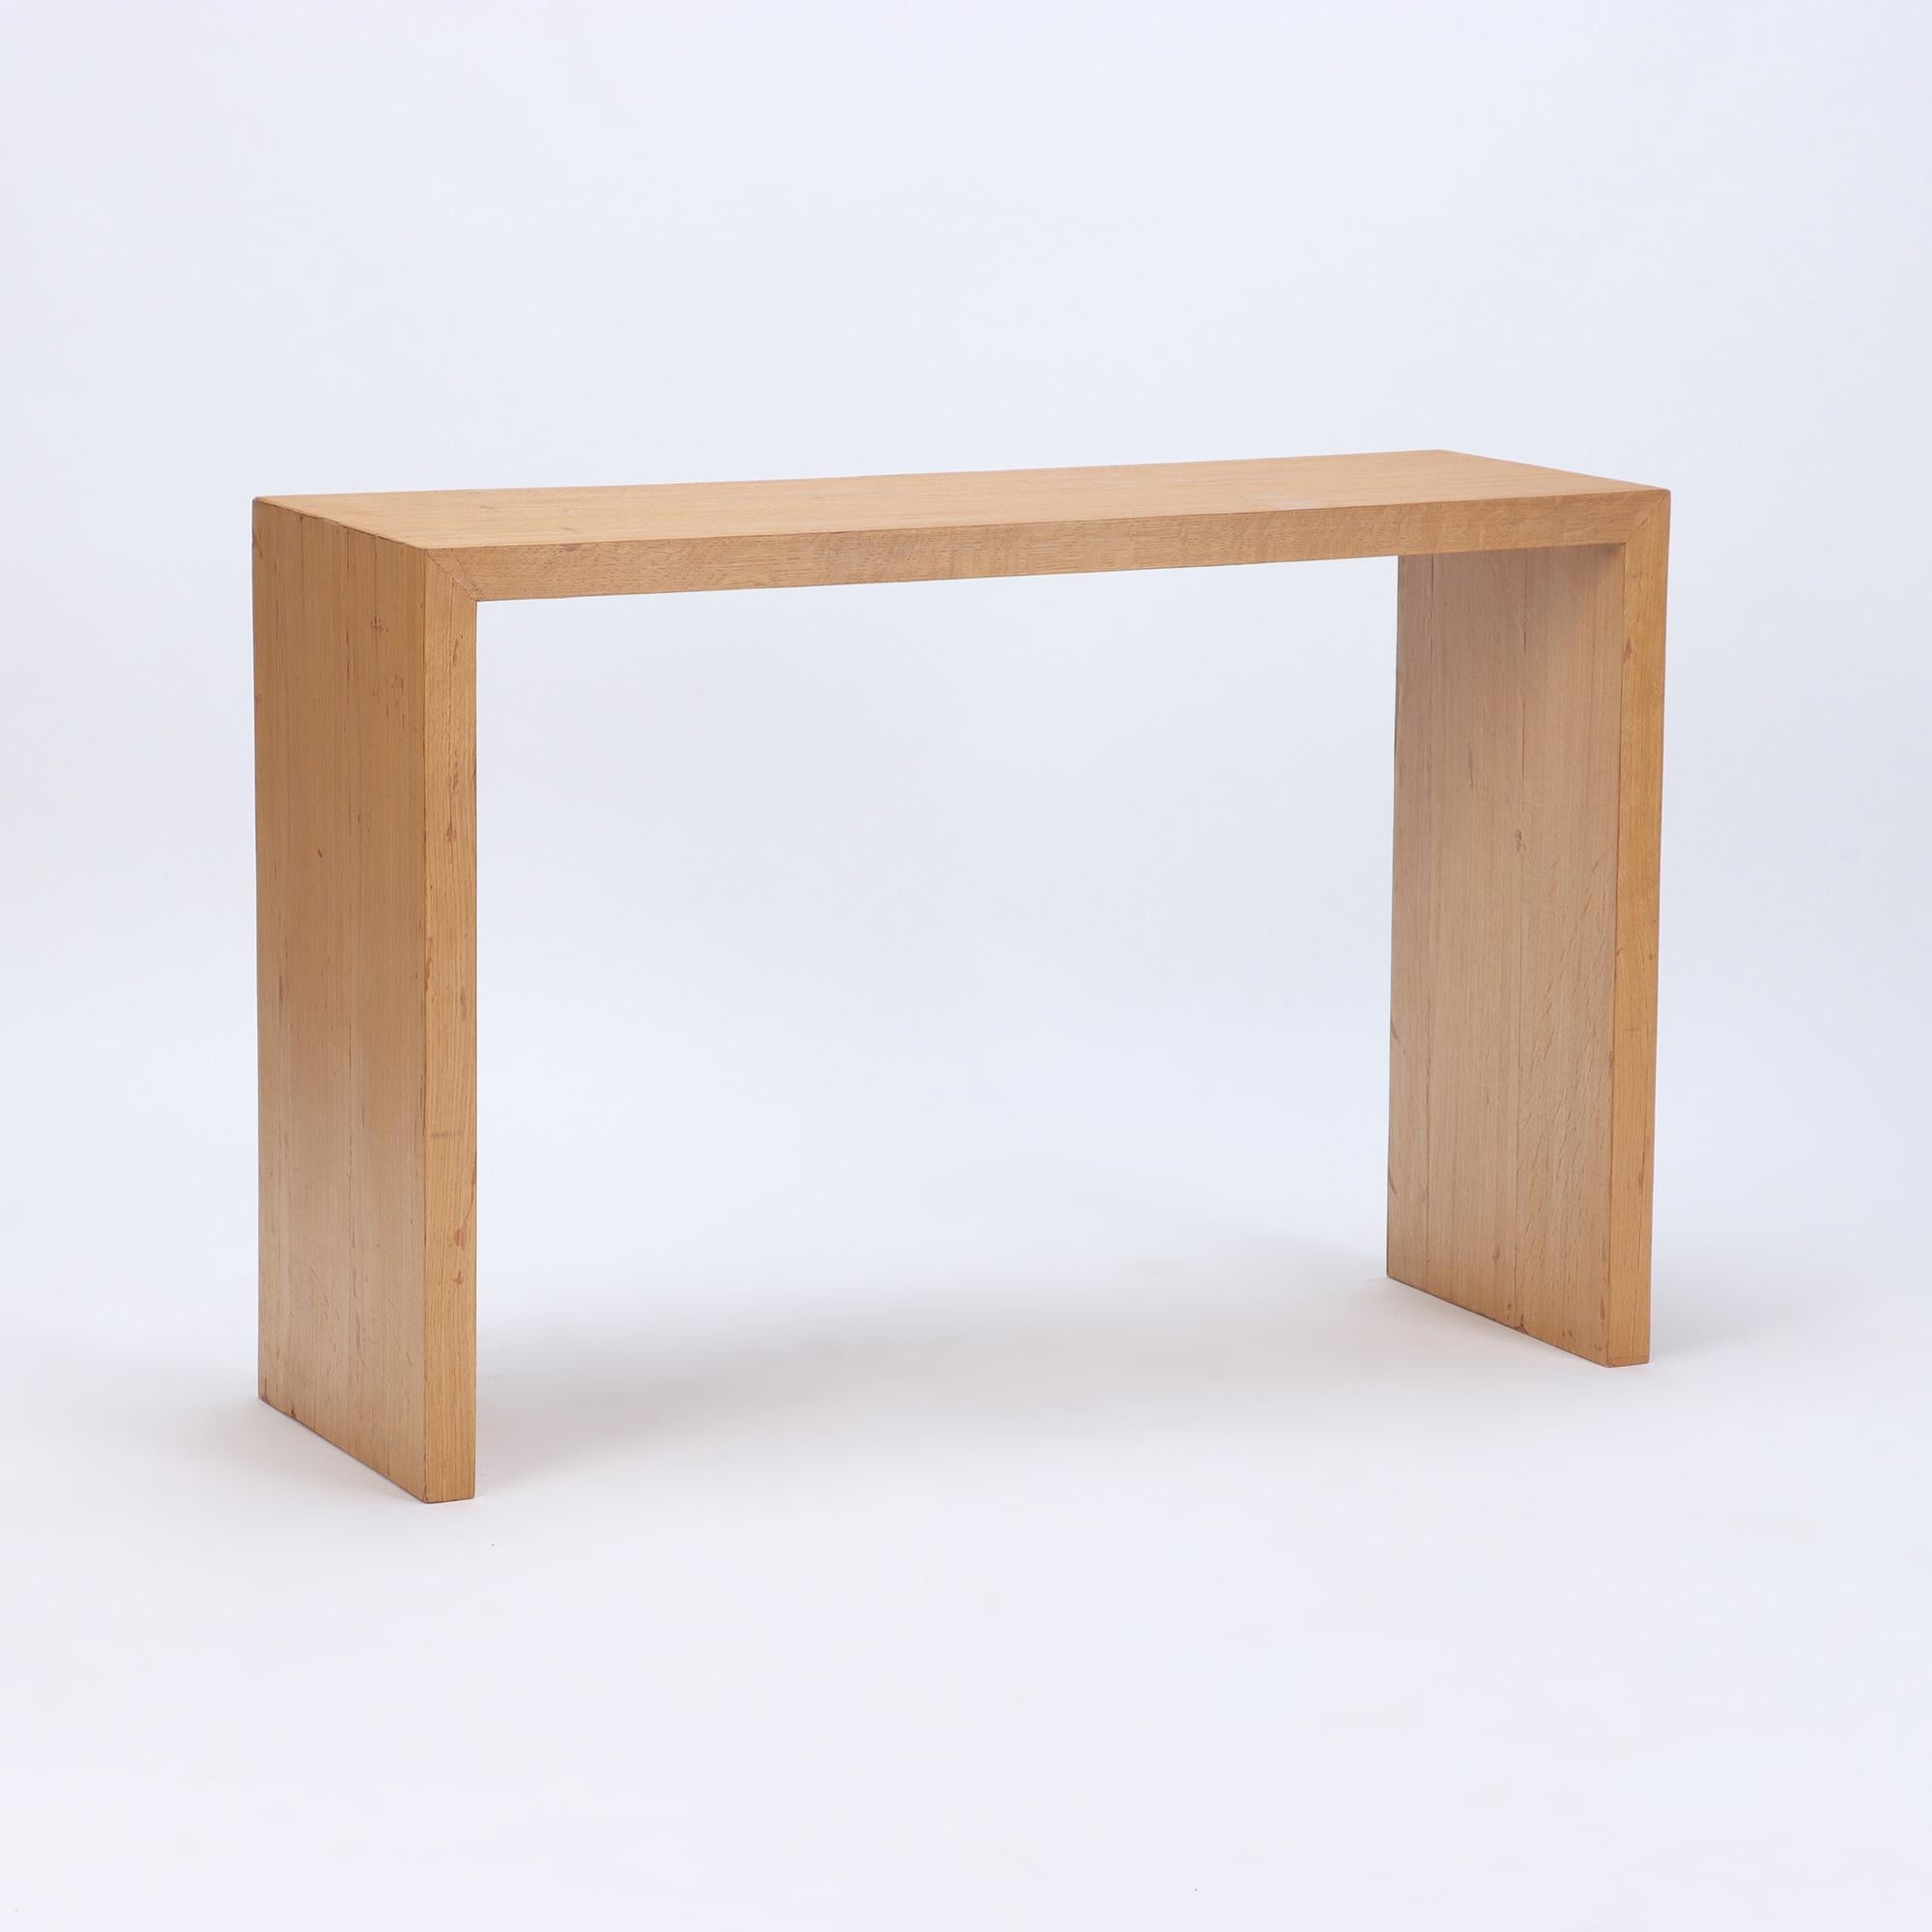 A pair of contemporary cerused oak console tables.